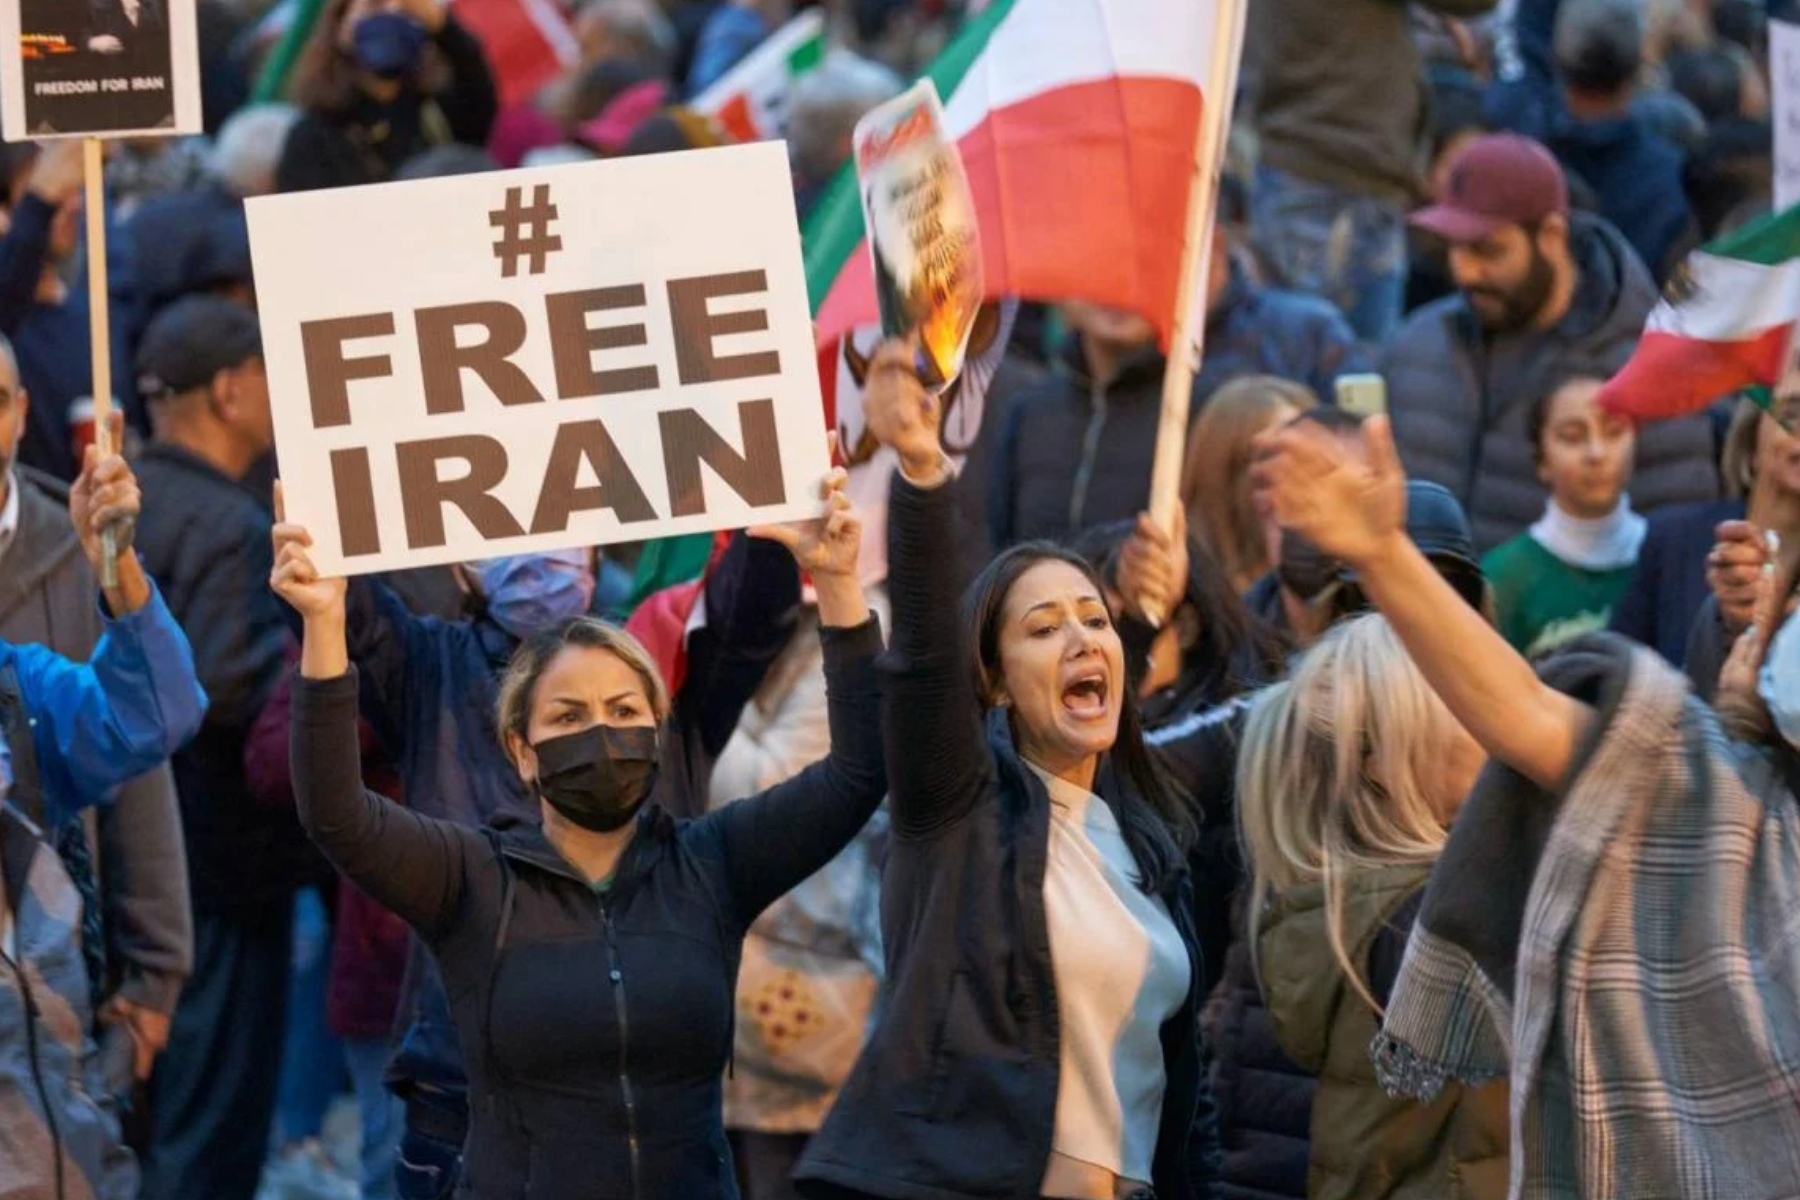 Iranian street protesters holding the banner #FREE IRAN